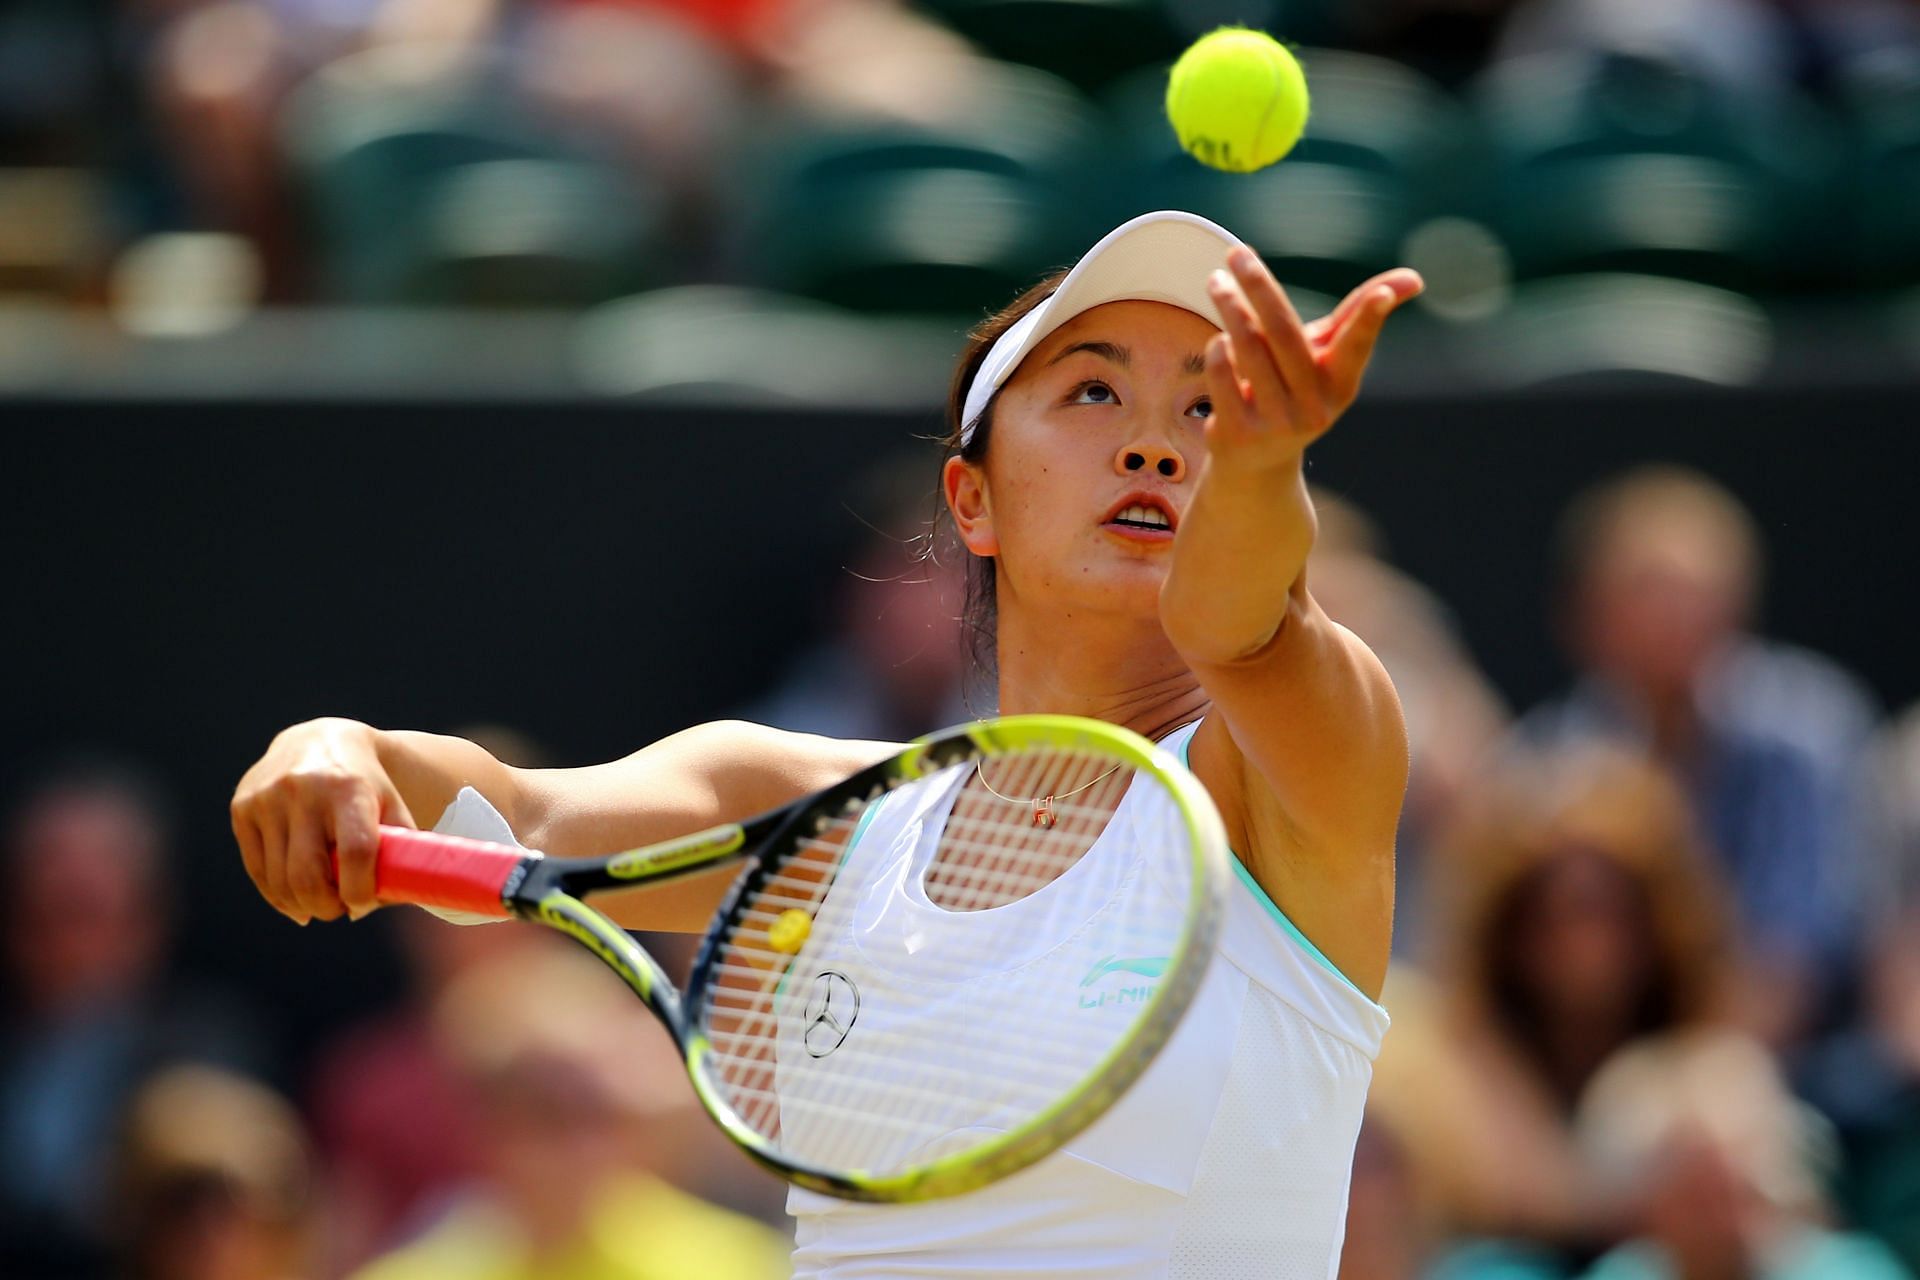 The tennis fraternity has been unanimous in its support for Peng Shuai.